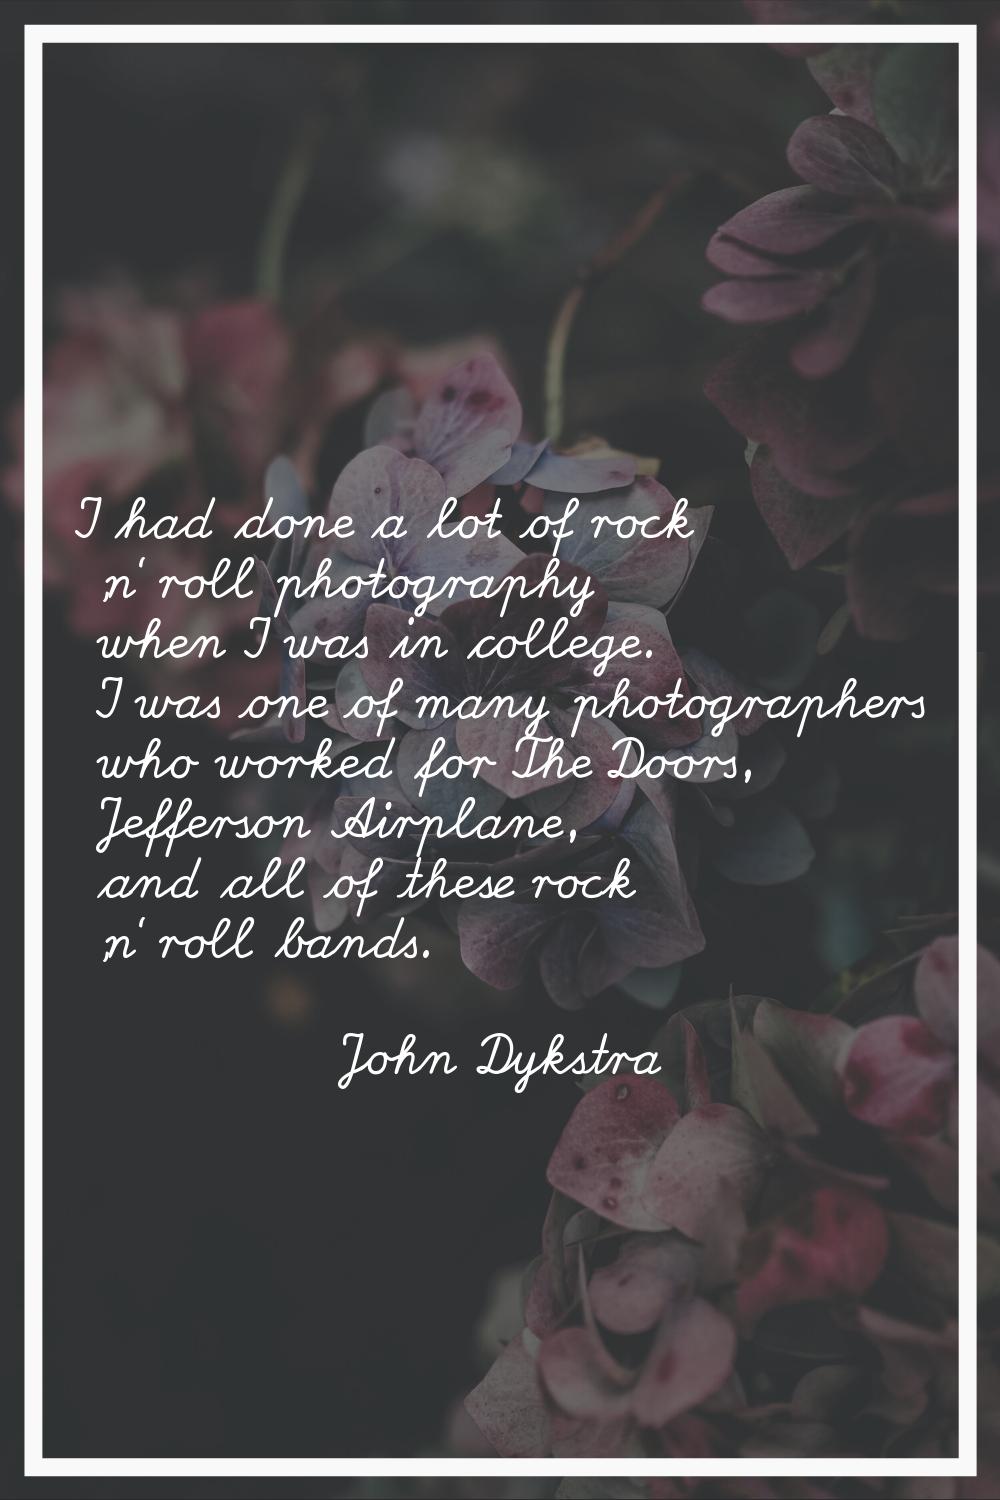 I had done a lot of rock 'n' roll photography when I was in college. I was one of many photographer